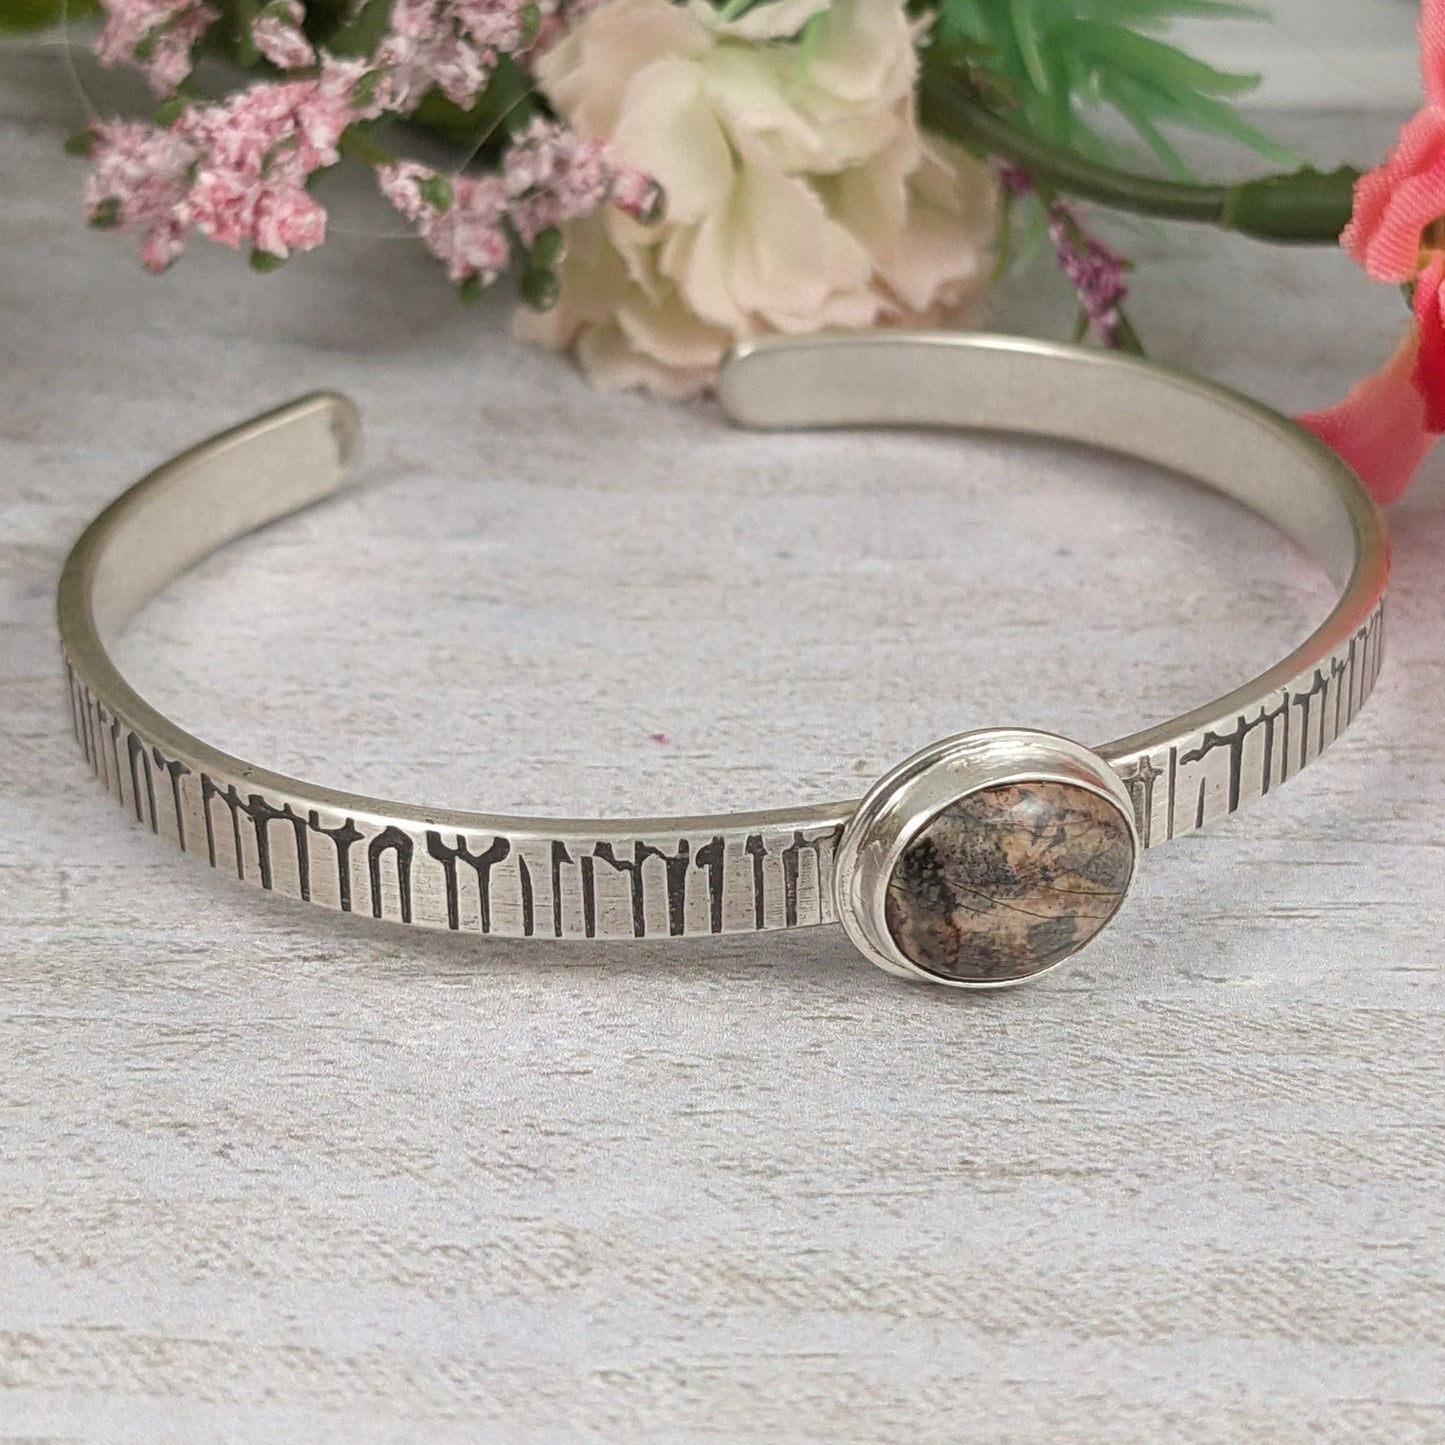 A stone in muted shades of pink, gray, and brown set on a narrow rectangular shaped sterling silver cuff bracelet. The cuff has a design that looks like an earthquake seismograph chart. Staged with flowers in the background.